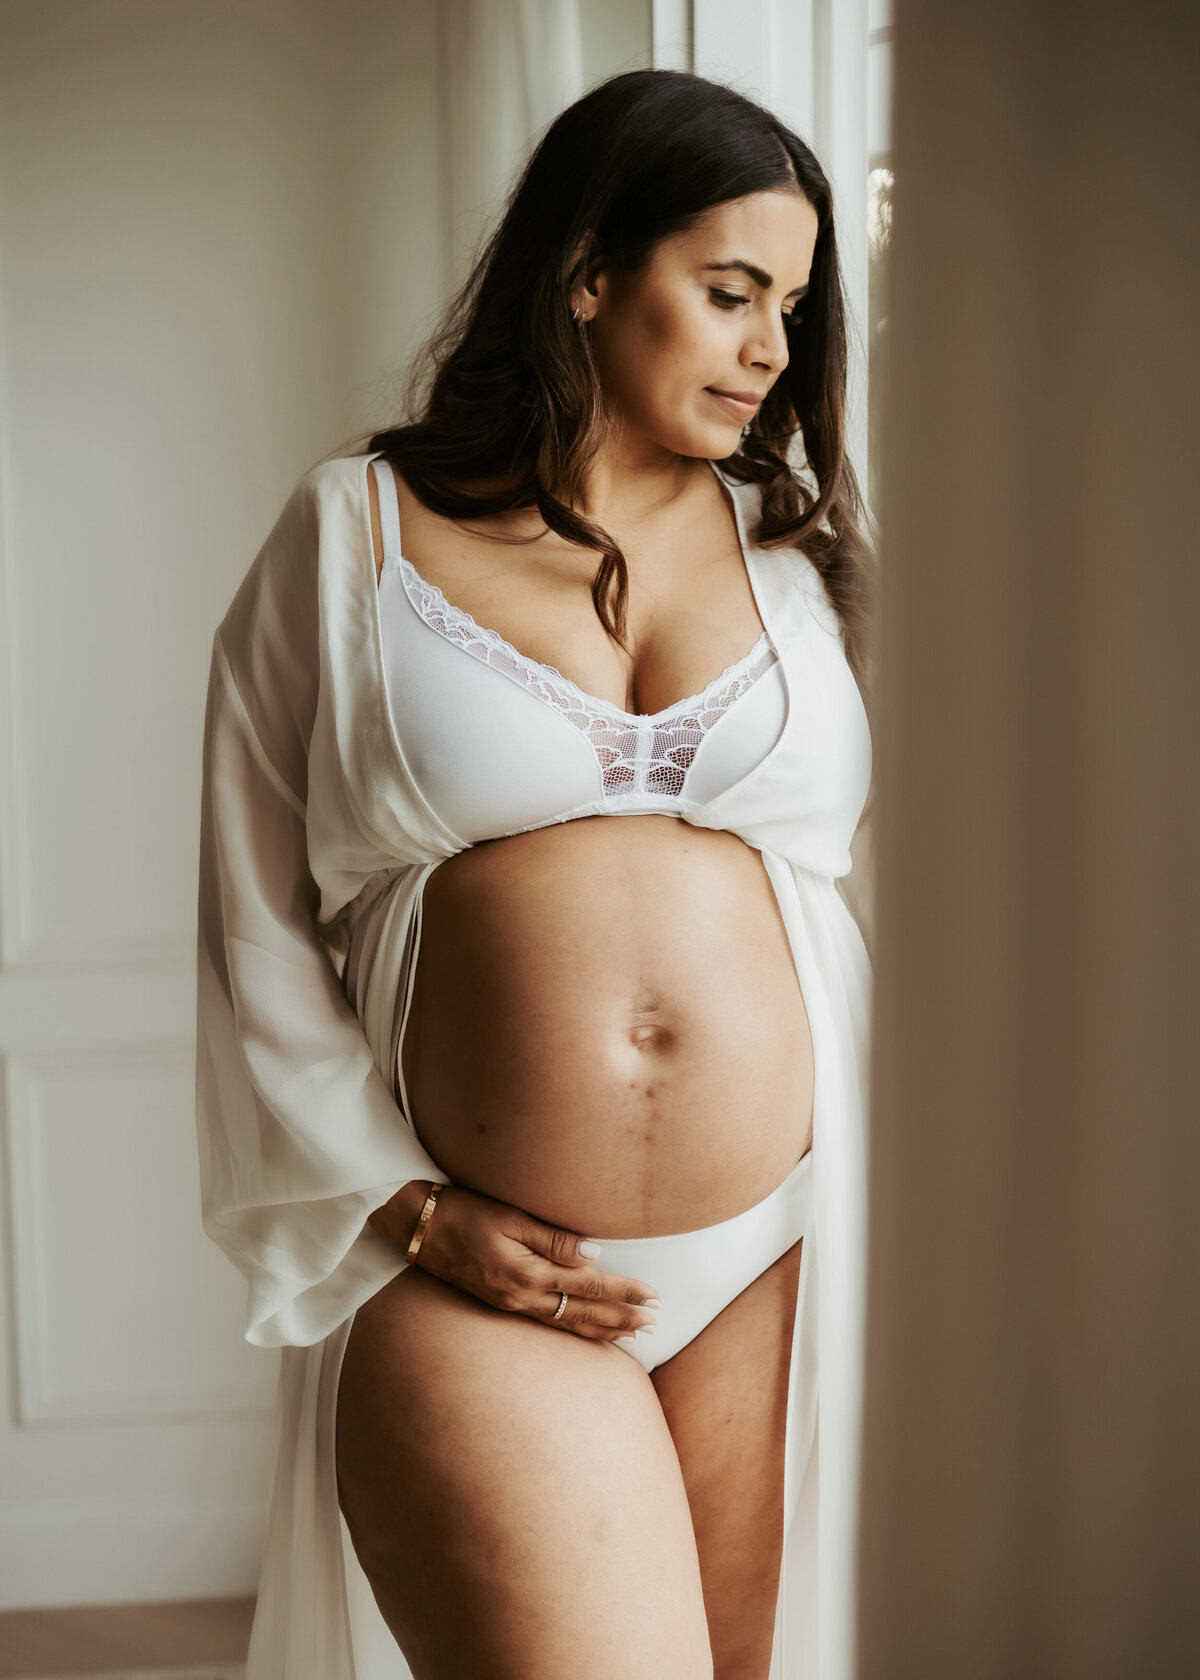 Sydney pregnant woman with black hair and wearing white underwear showing off her beautiful baby bump